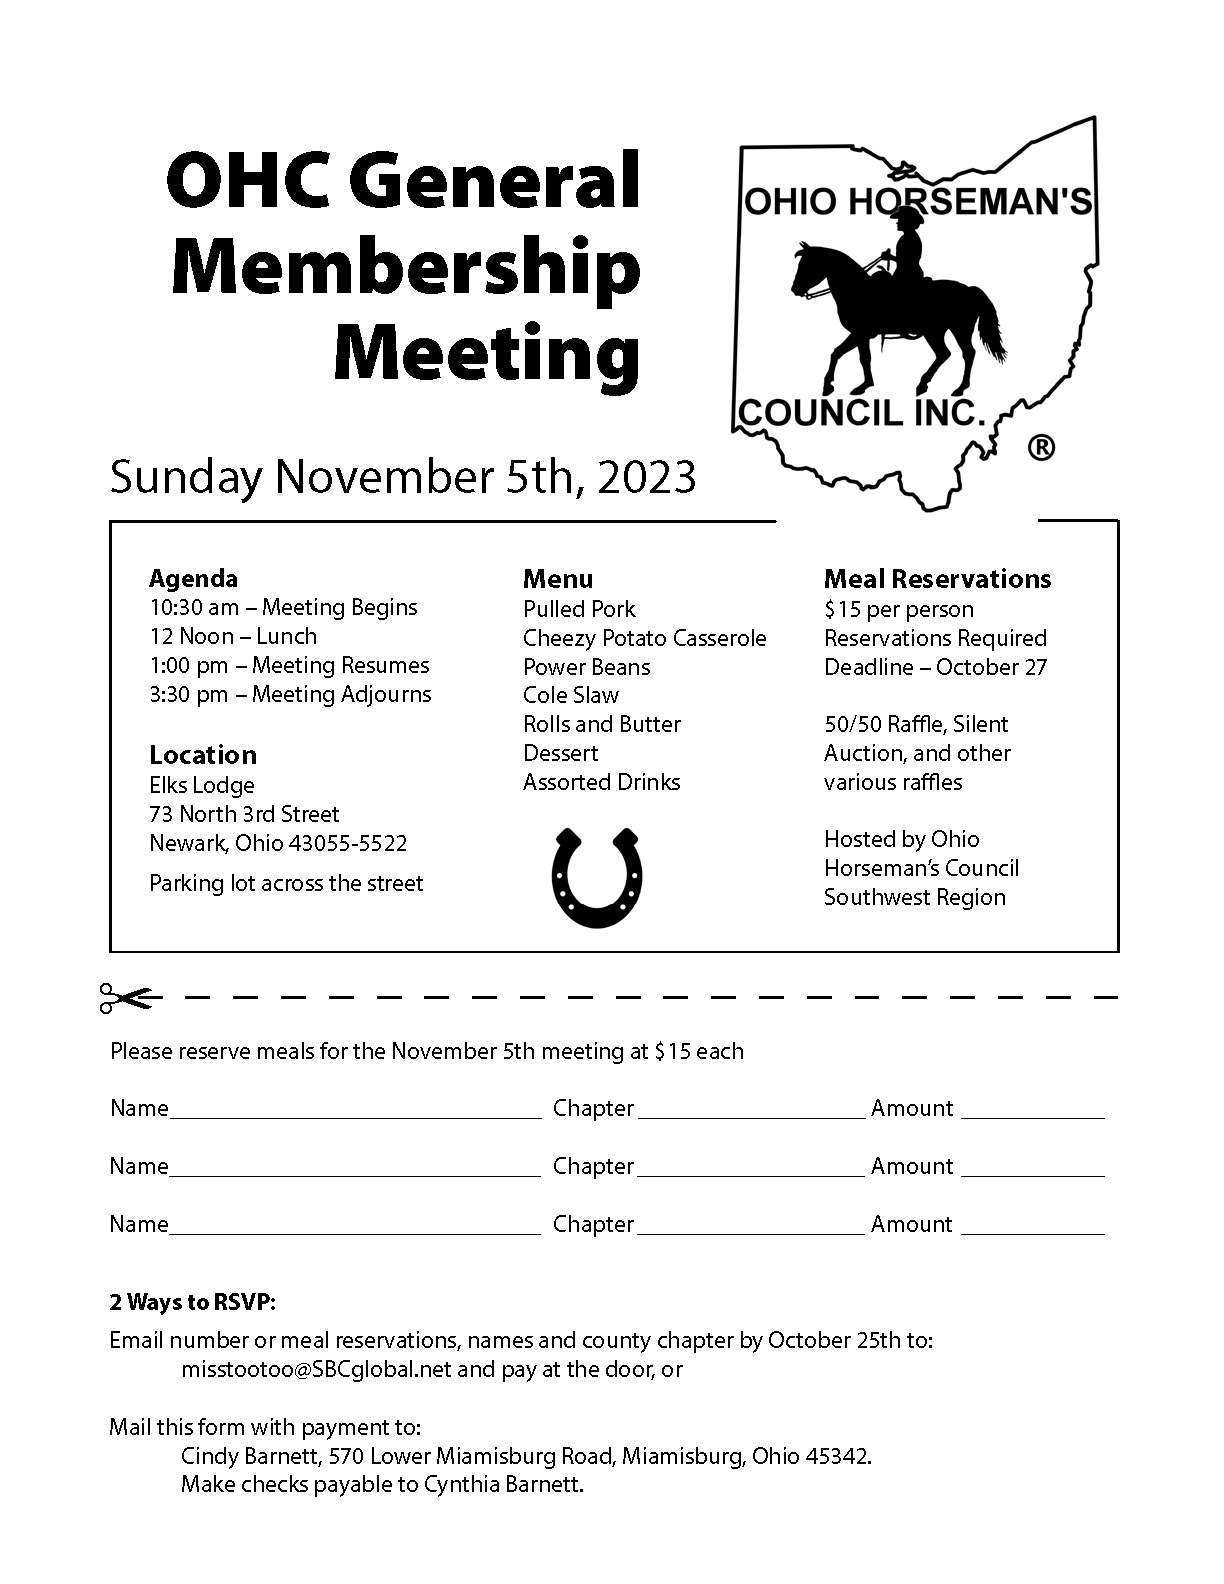 General Membership Meeting is Scheduled for Sunday, November 5th